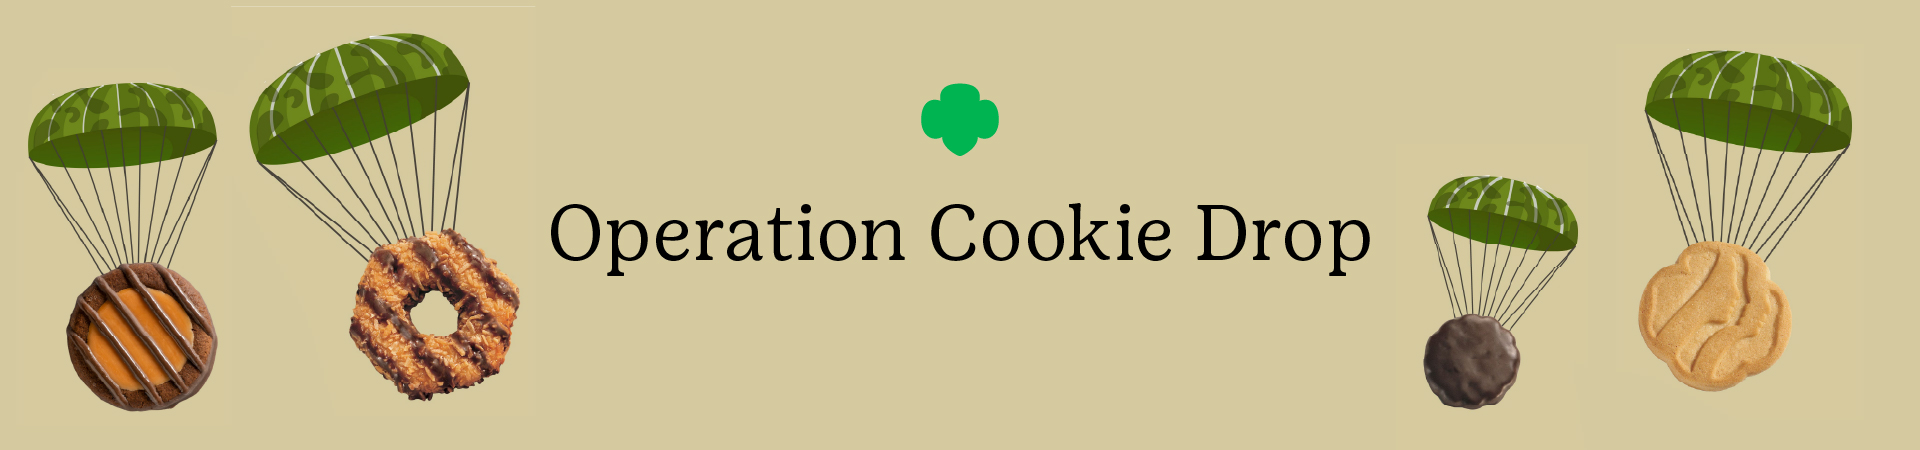  Operation Cookie Drop text with cookies parachuting 